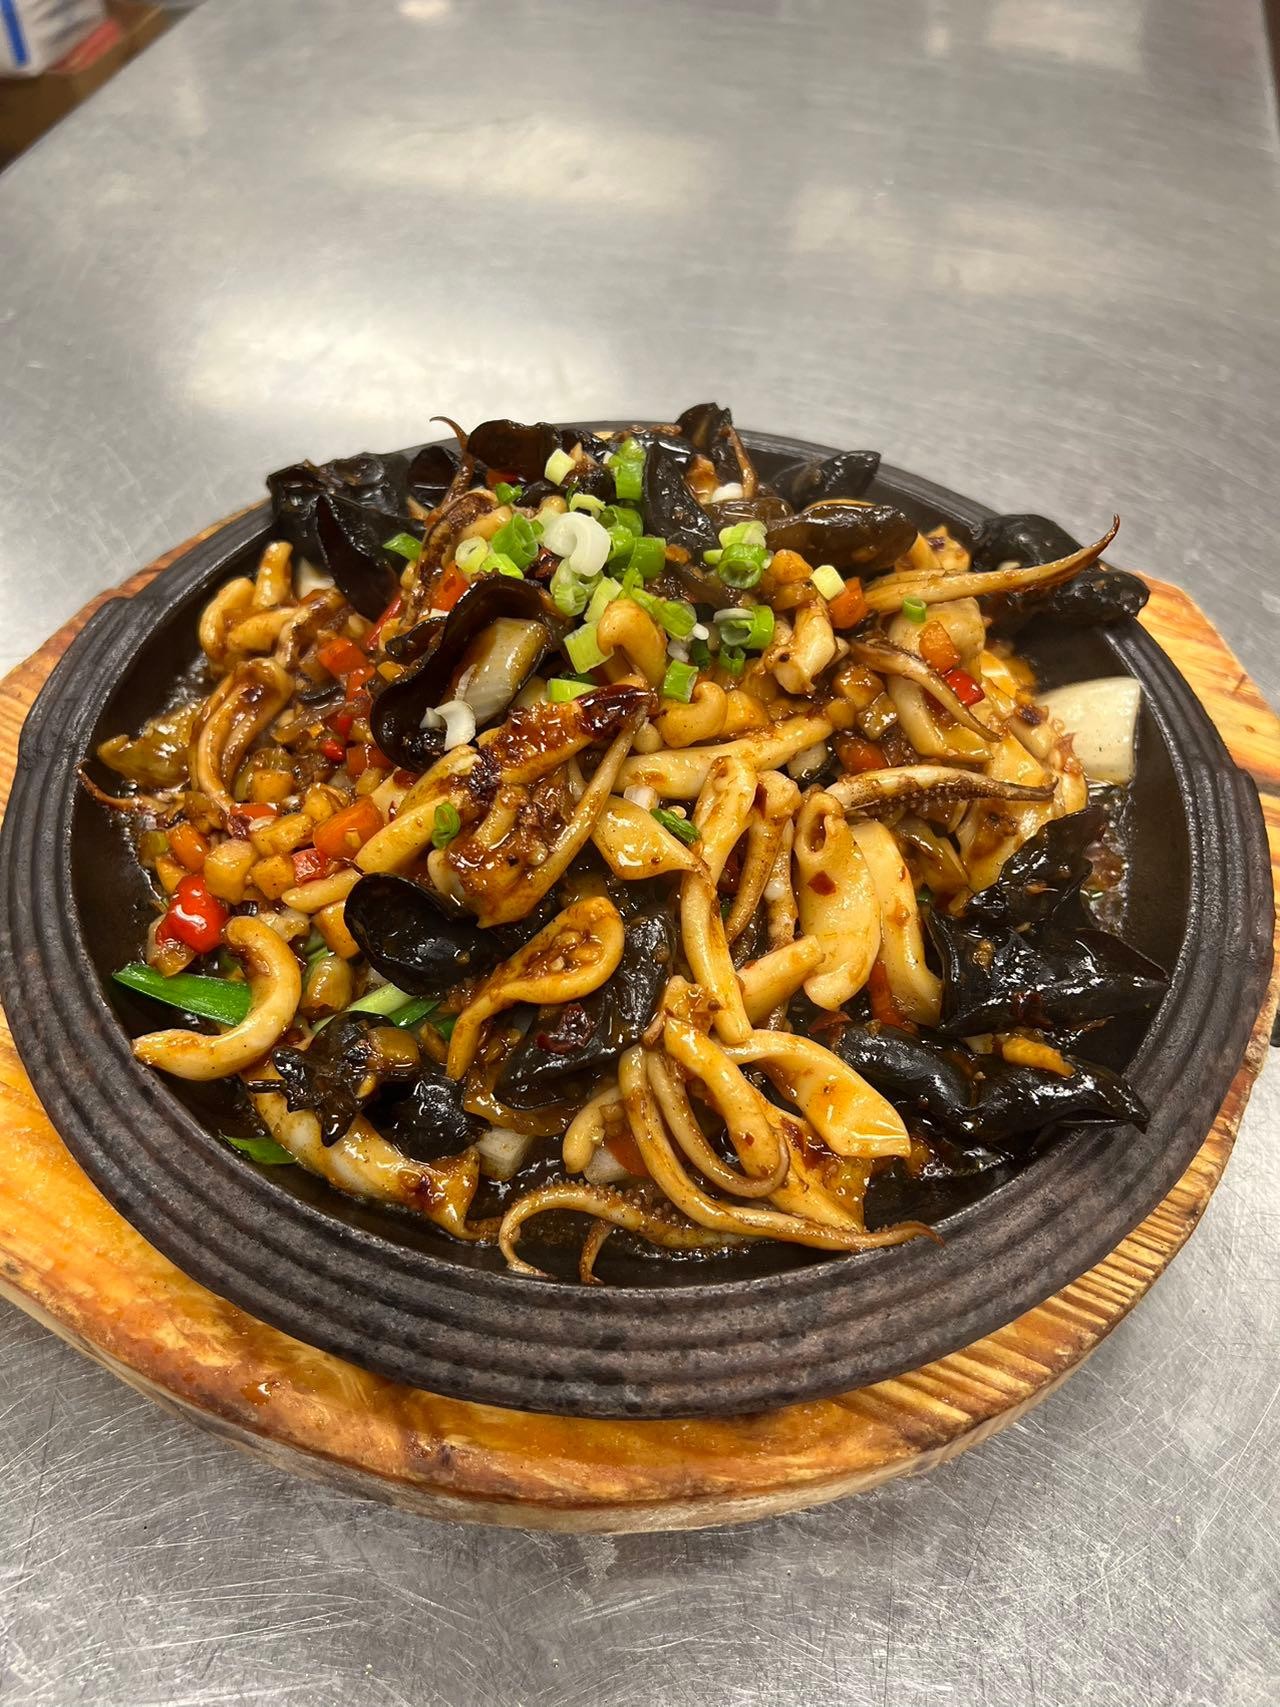 S4个性鱿鱼 Sizzling Calamari with Chili and Chives